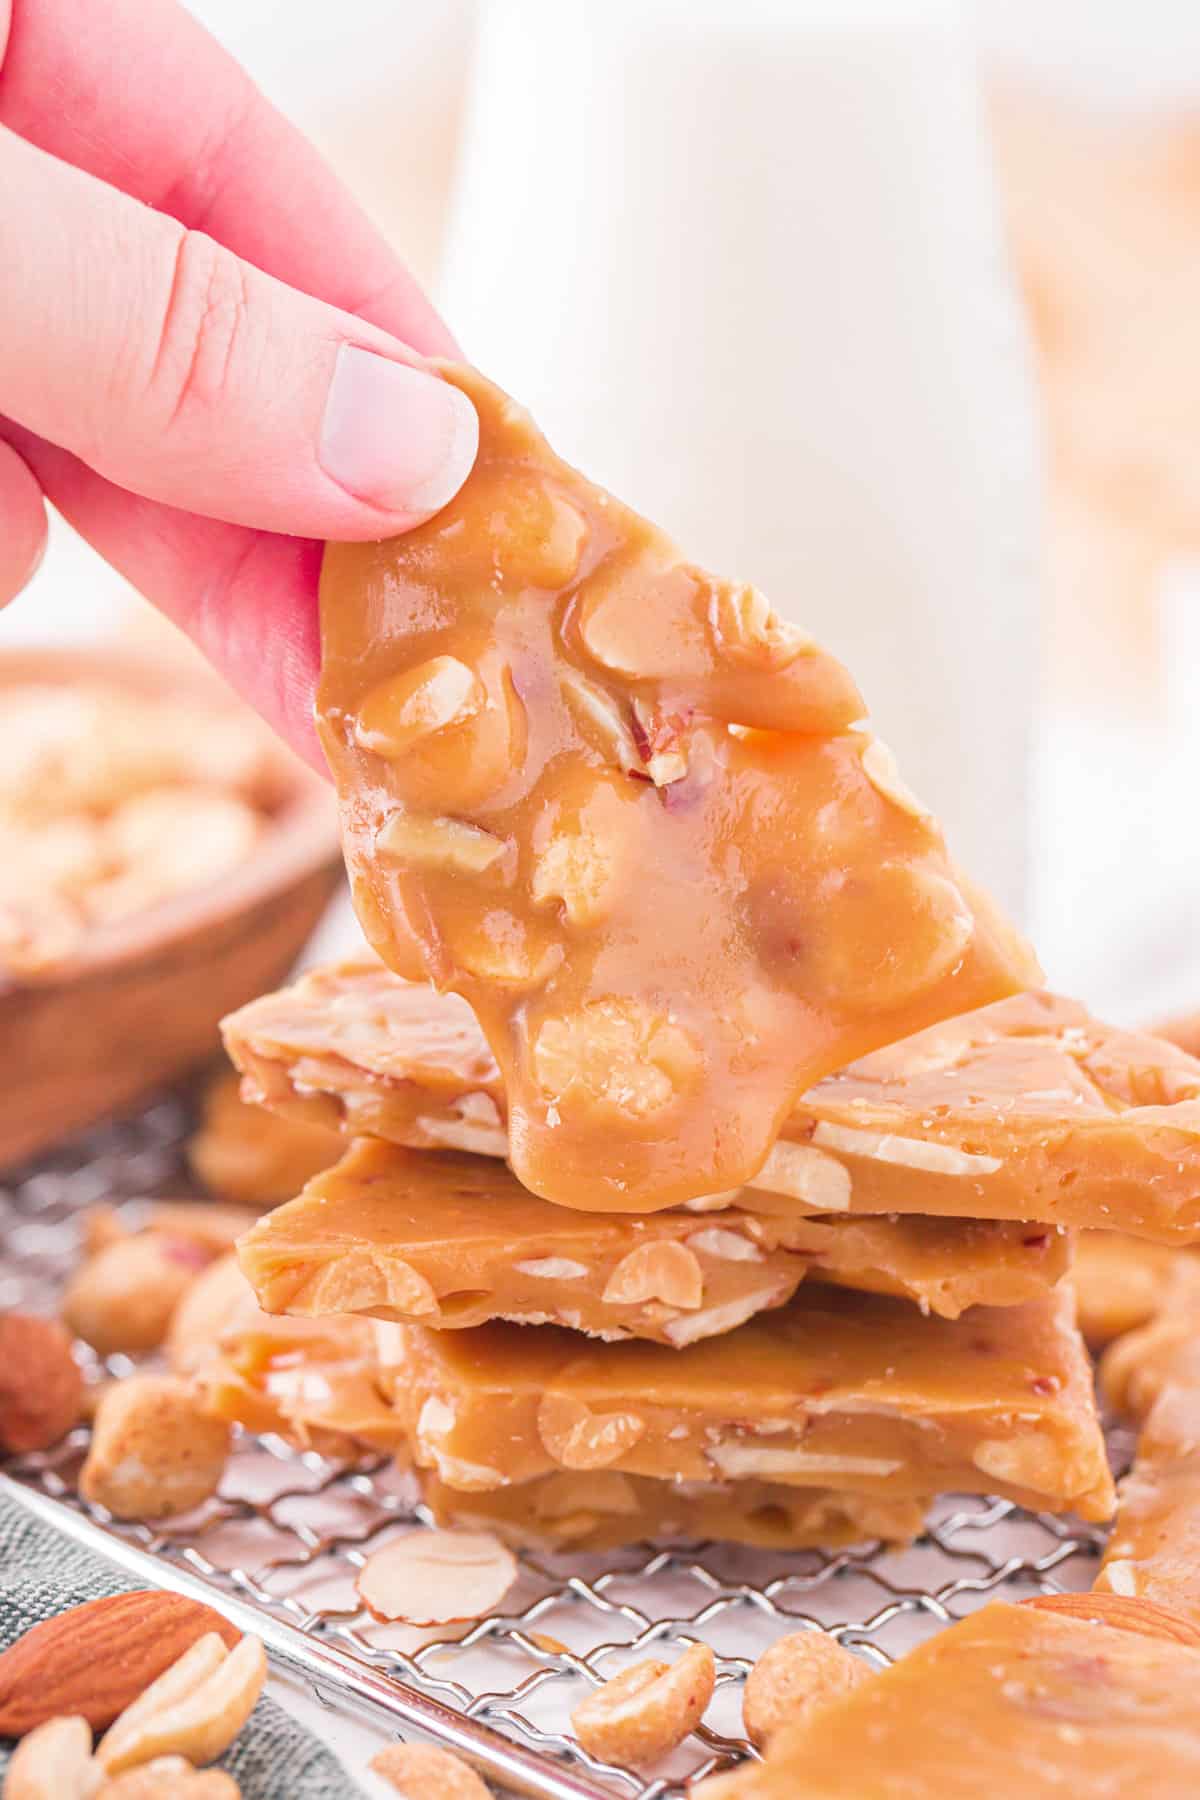 Fingers holding a piece of caramel nut brittle.